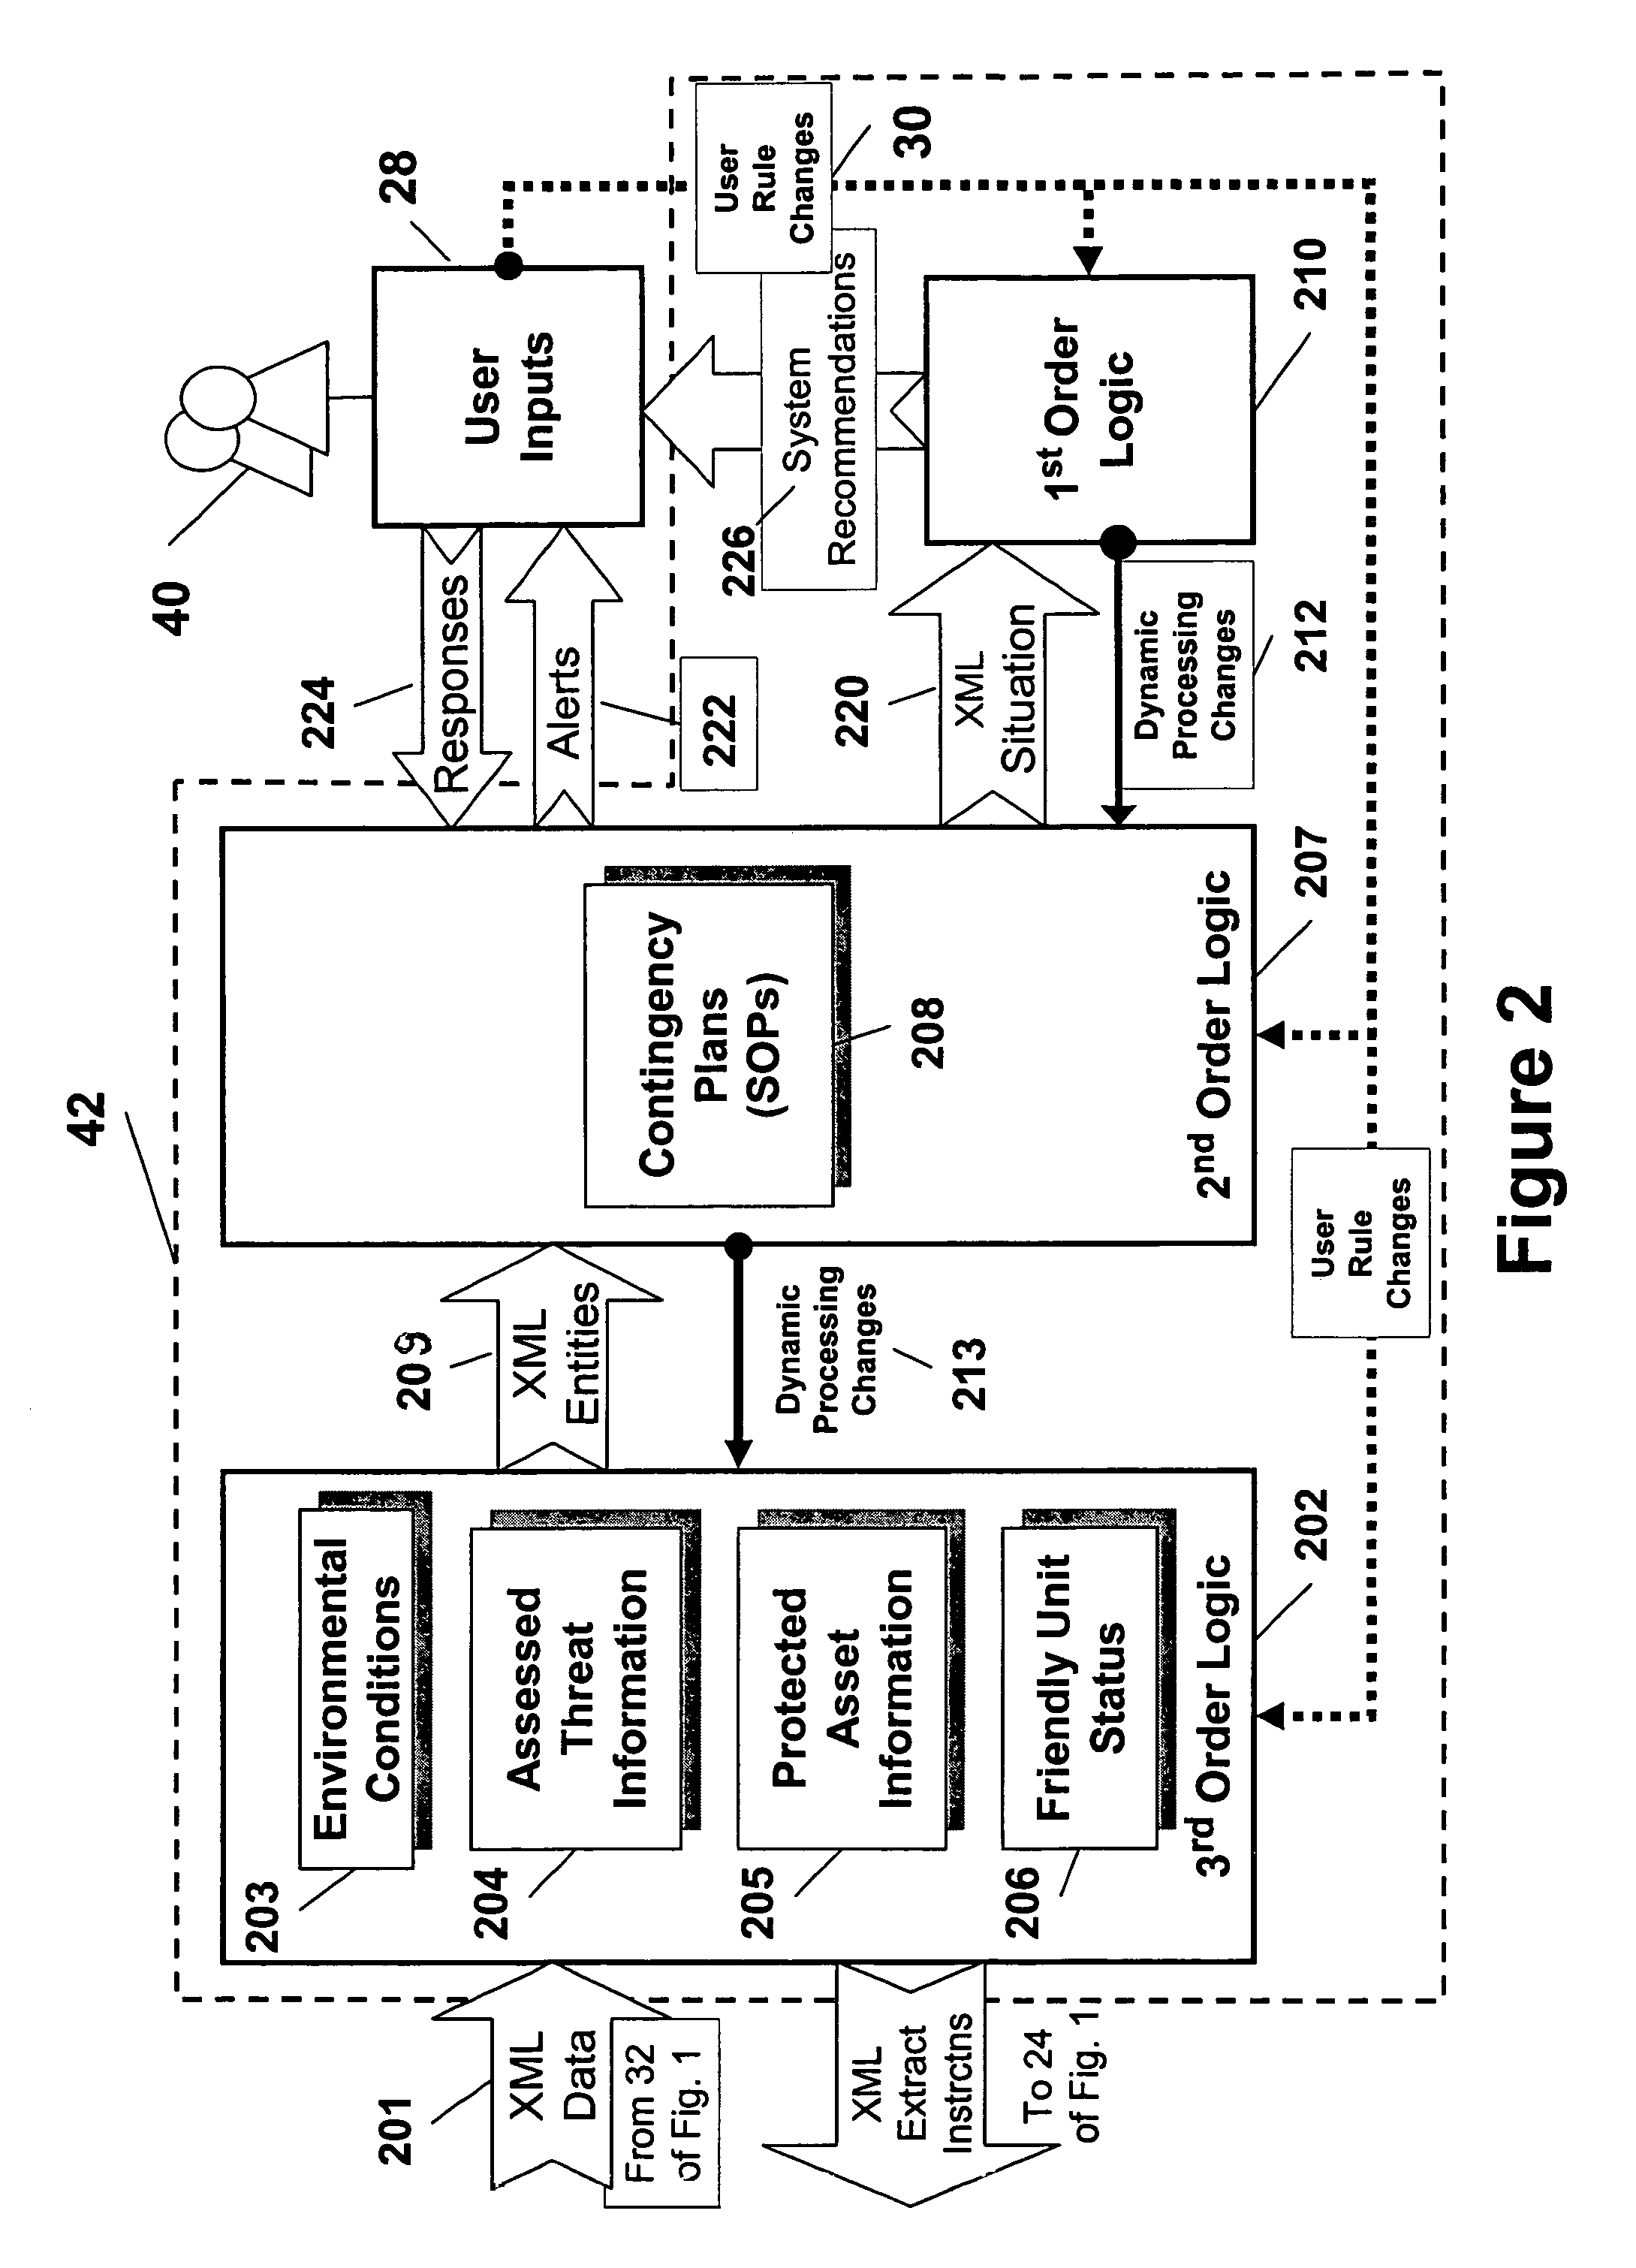 Enhanced dynamic decision support processing using fused multiple disparate data sources